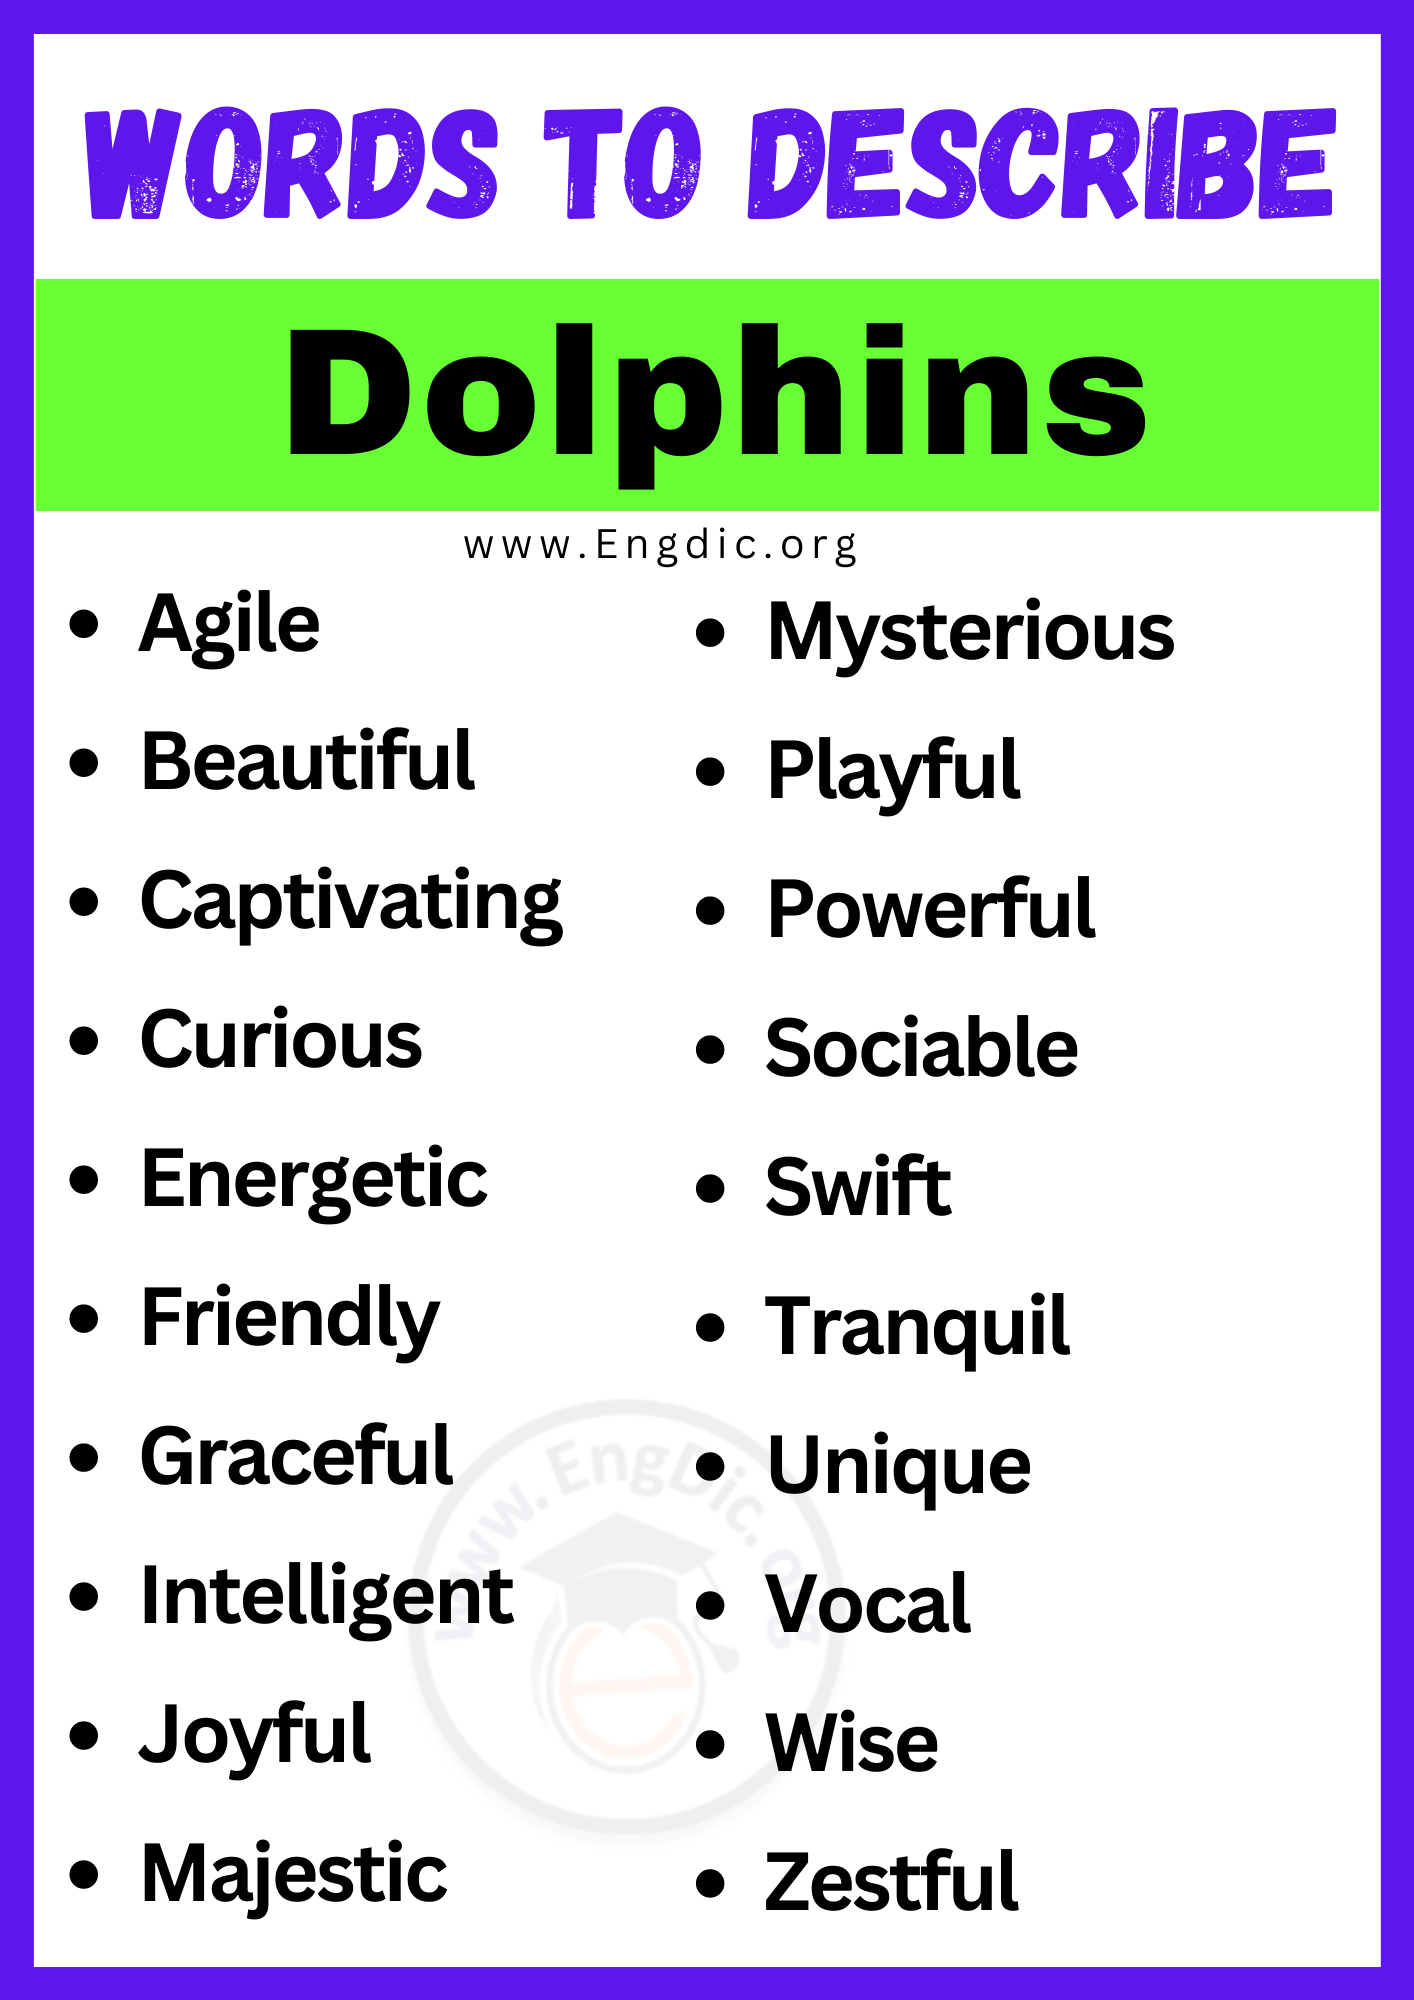 Words to Describe Dolphins